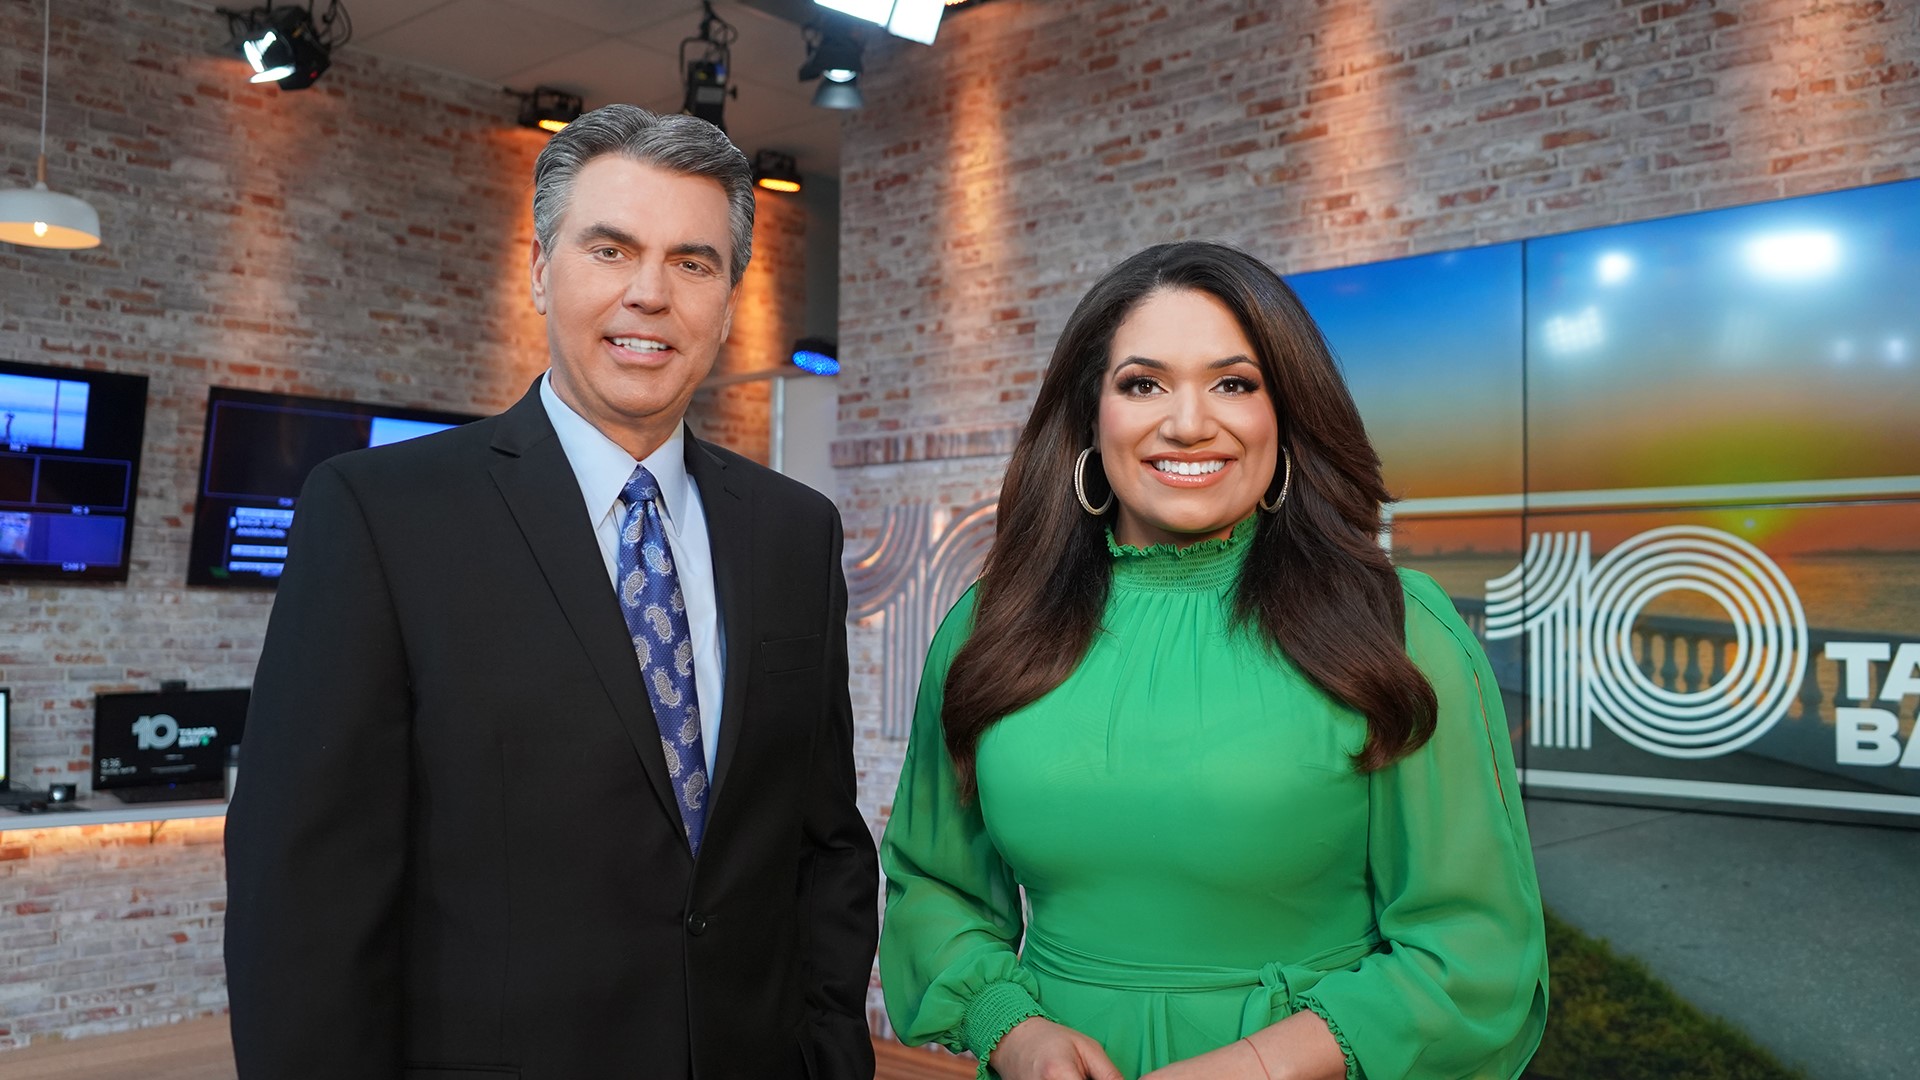 From lifestyle interviews to live breaking news coverage, the AM crew brings you everything you need to know to plan your weekend, including the latest forecast.
